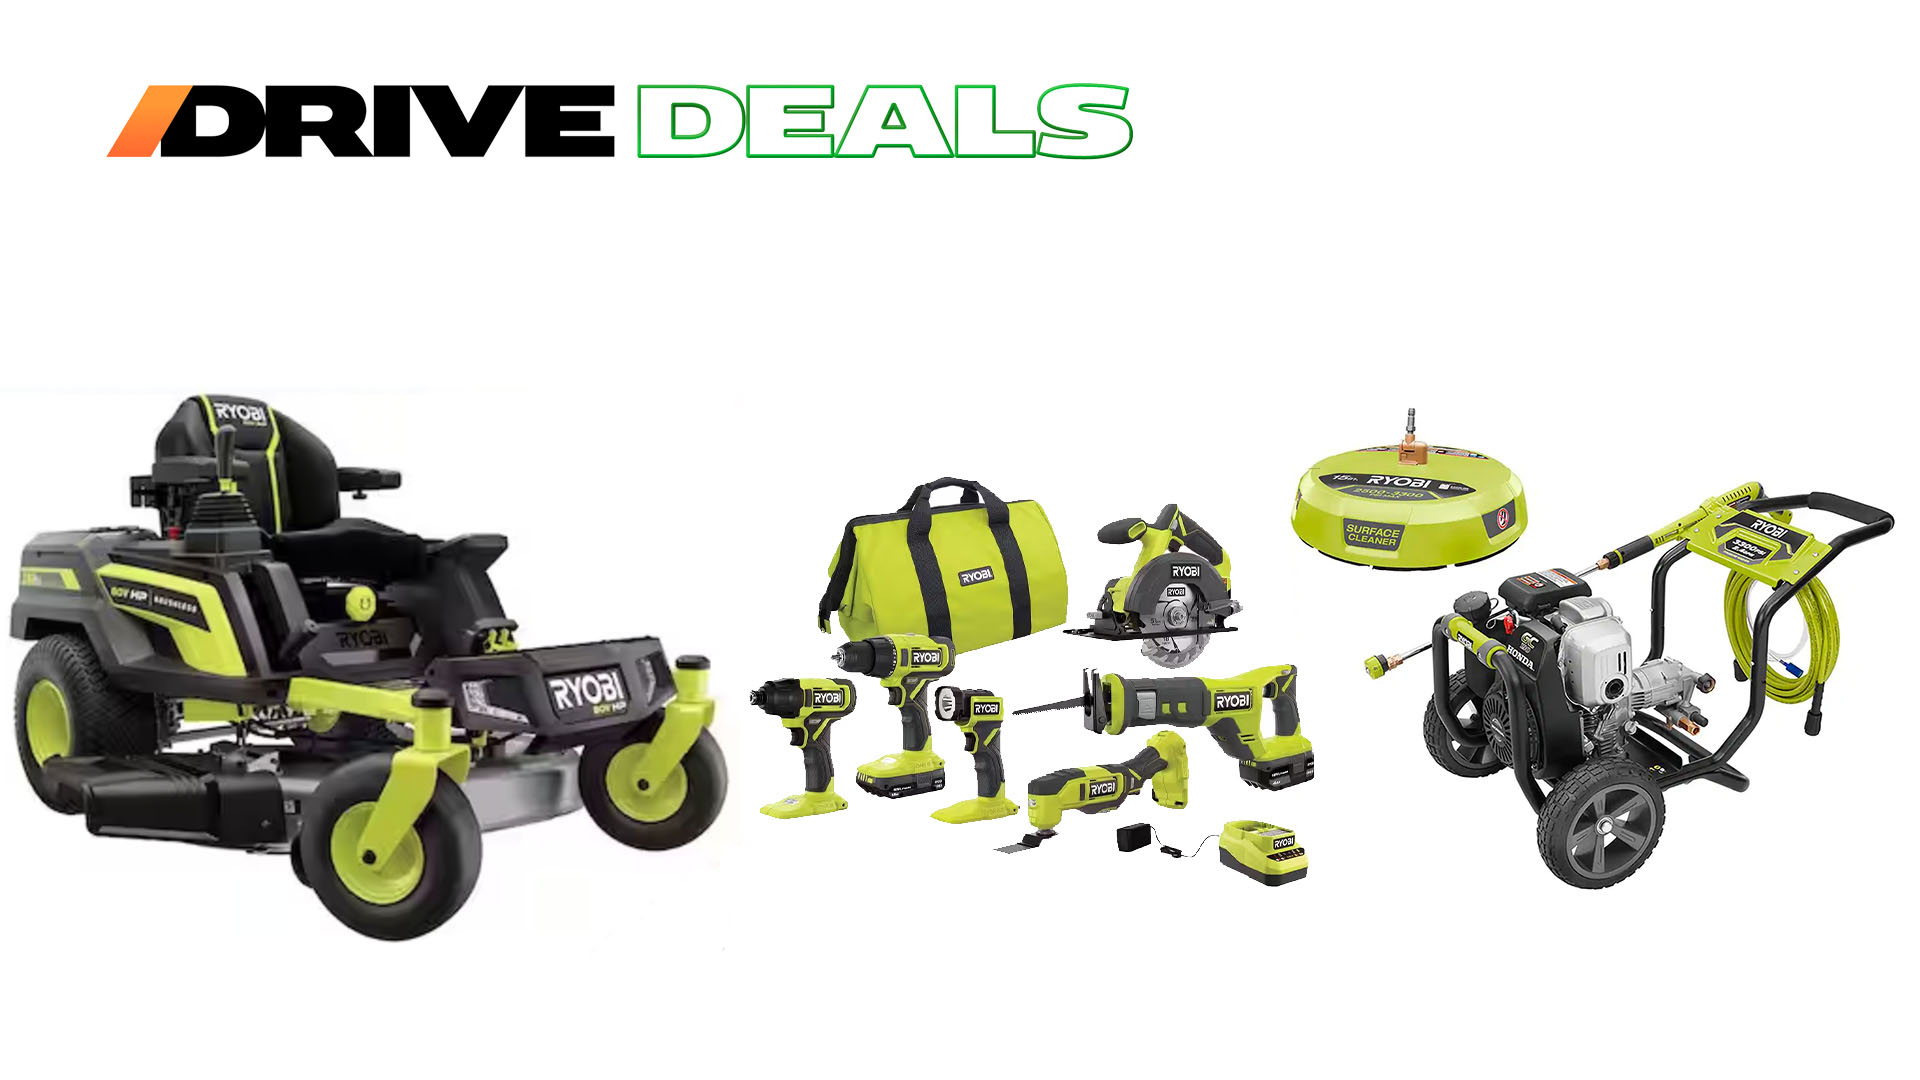 Shop Amazing Home Depot Deals on RYOBI Lawn and Garden Equipment Today Only